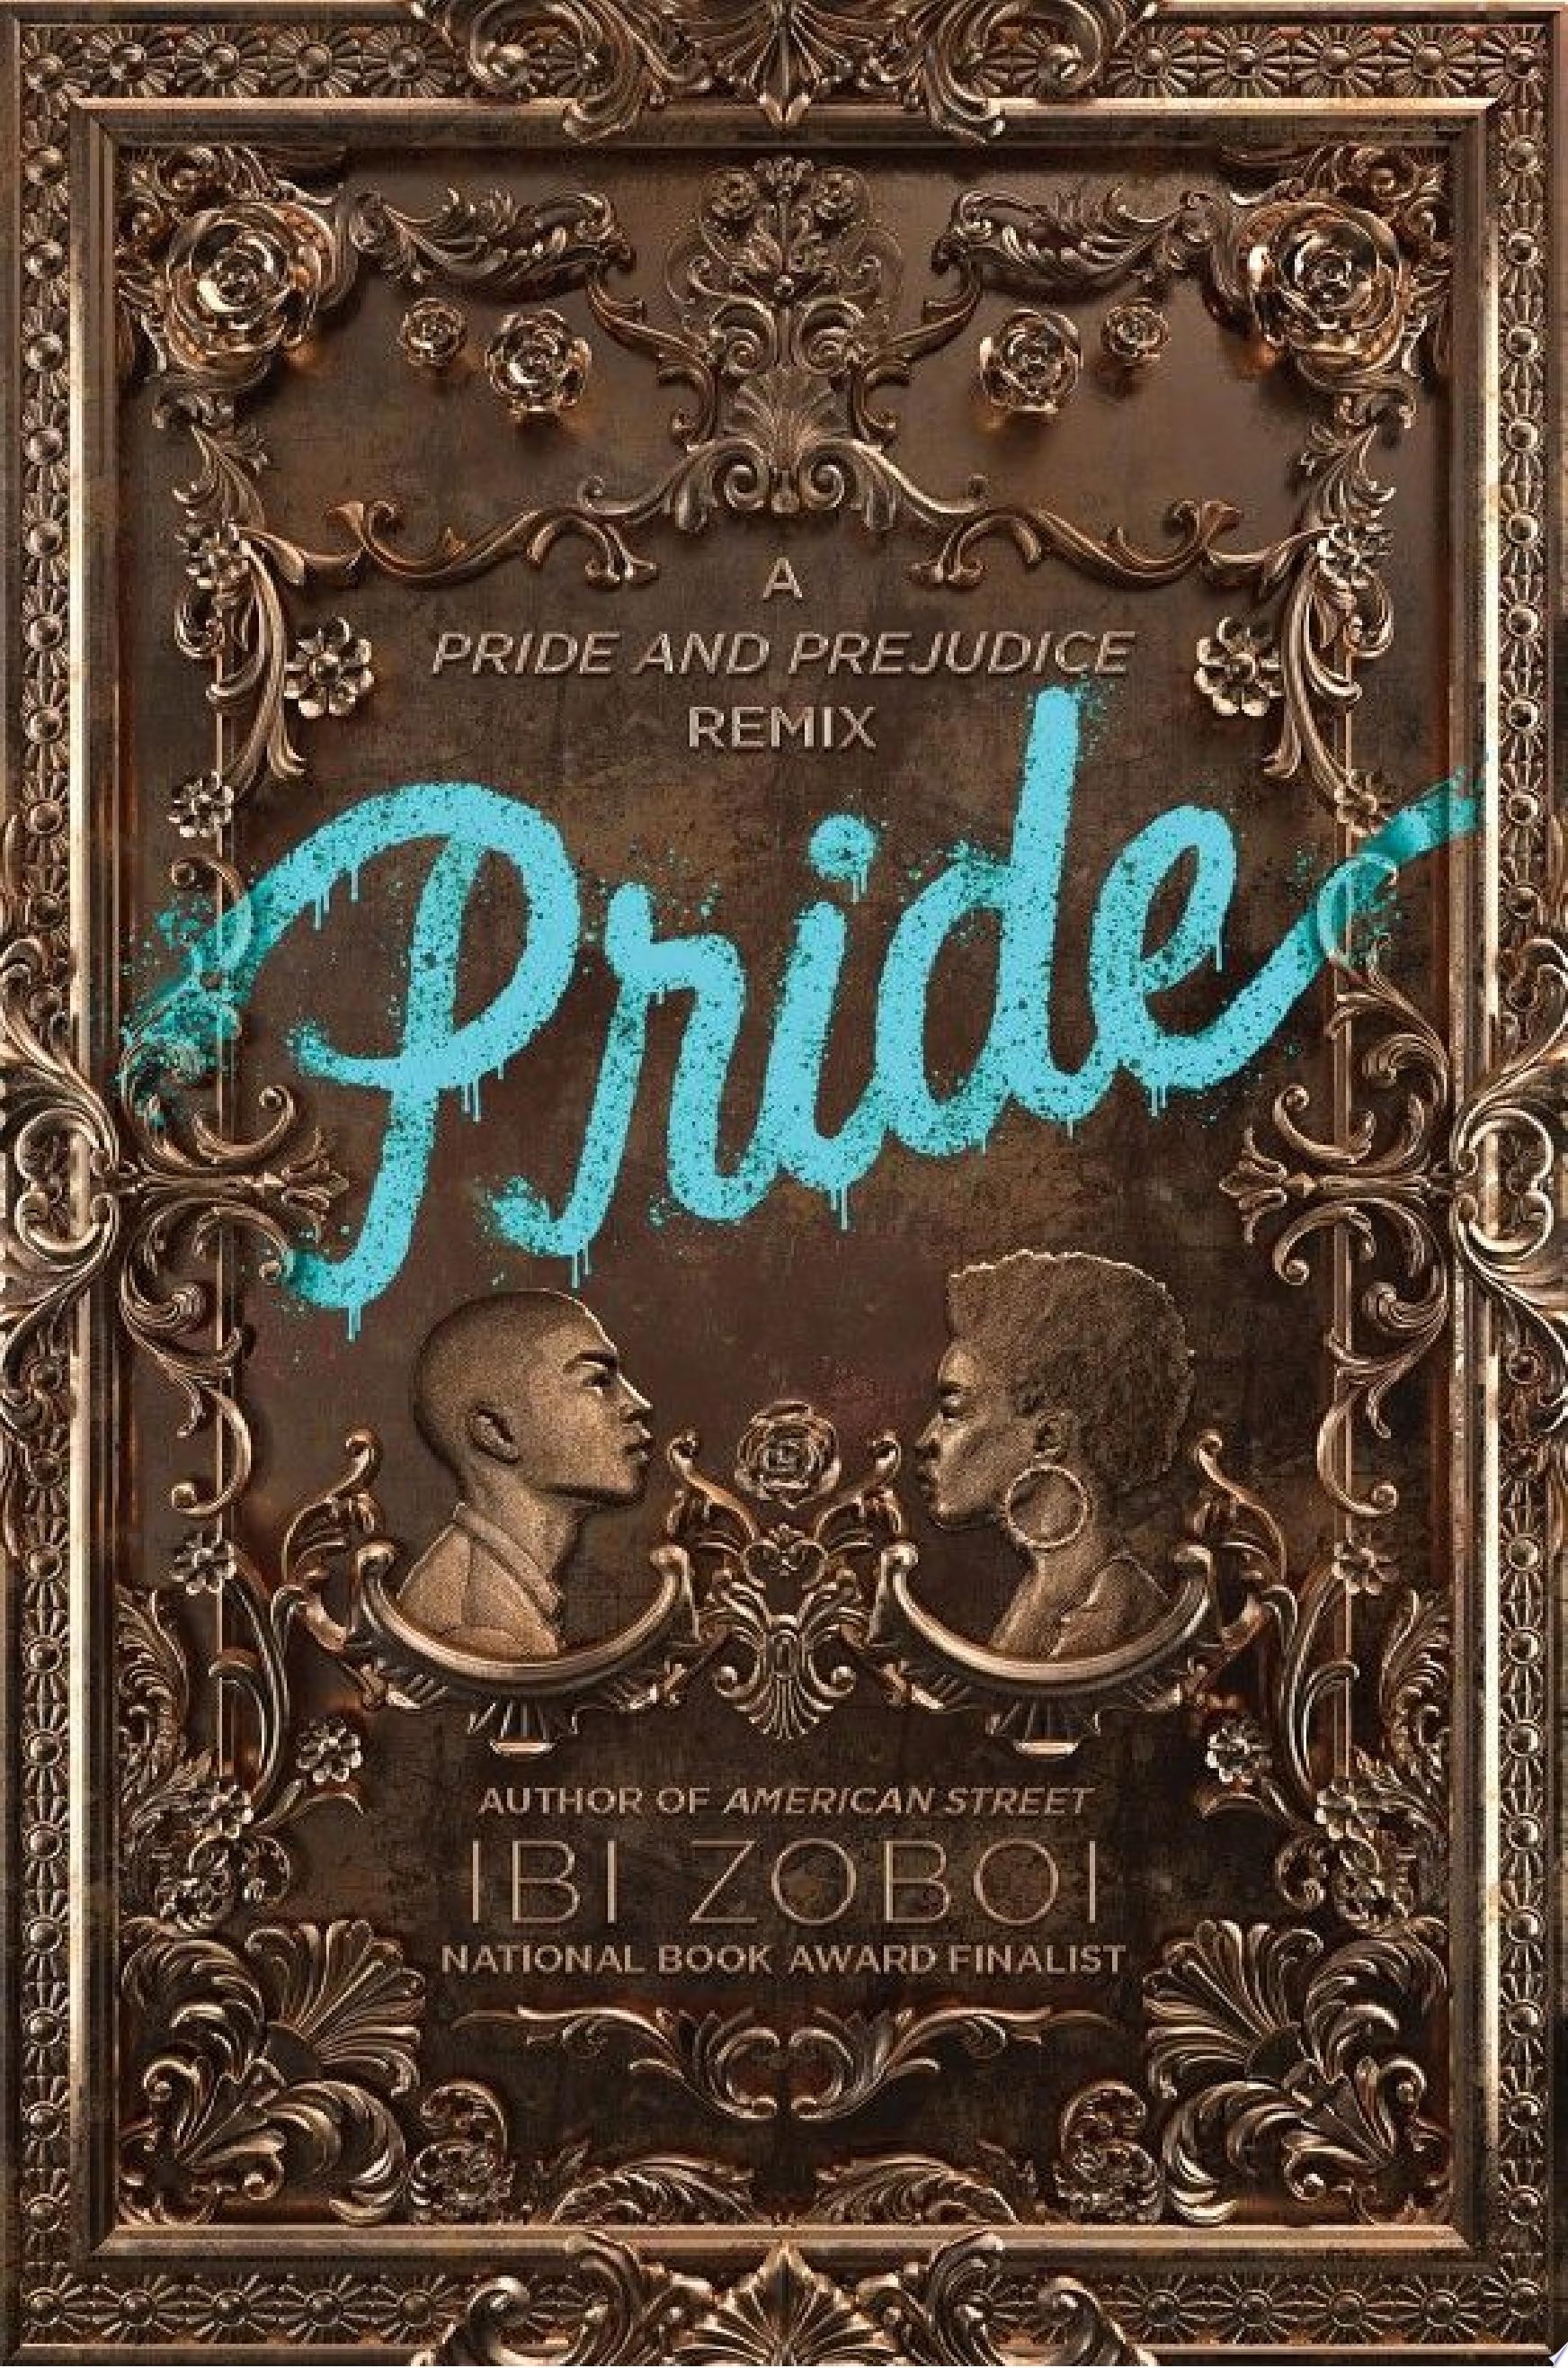 Image for "Pride"